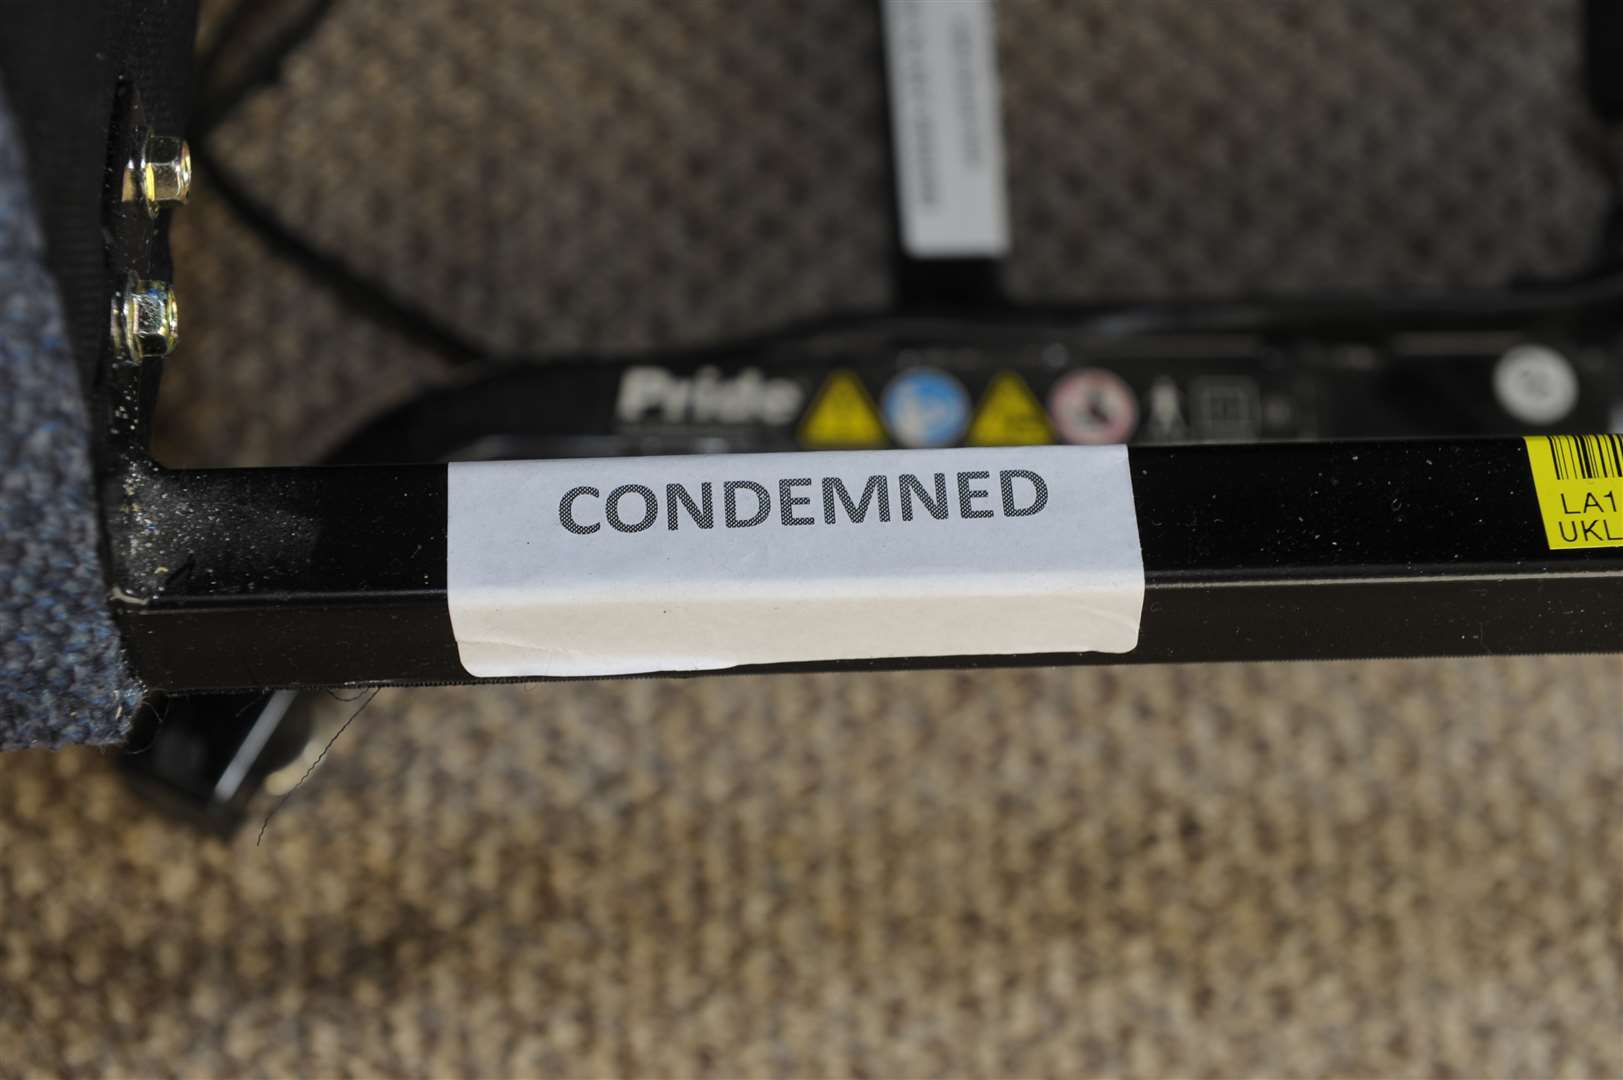 A sticker on the chair saying it is "condemned"